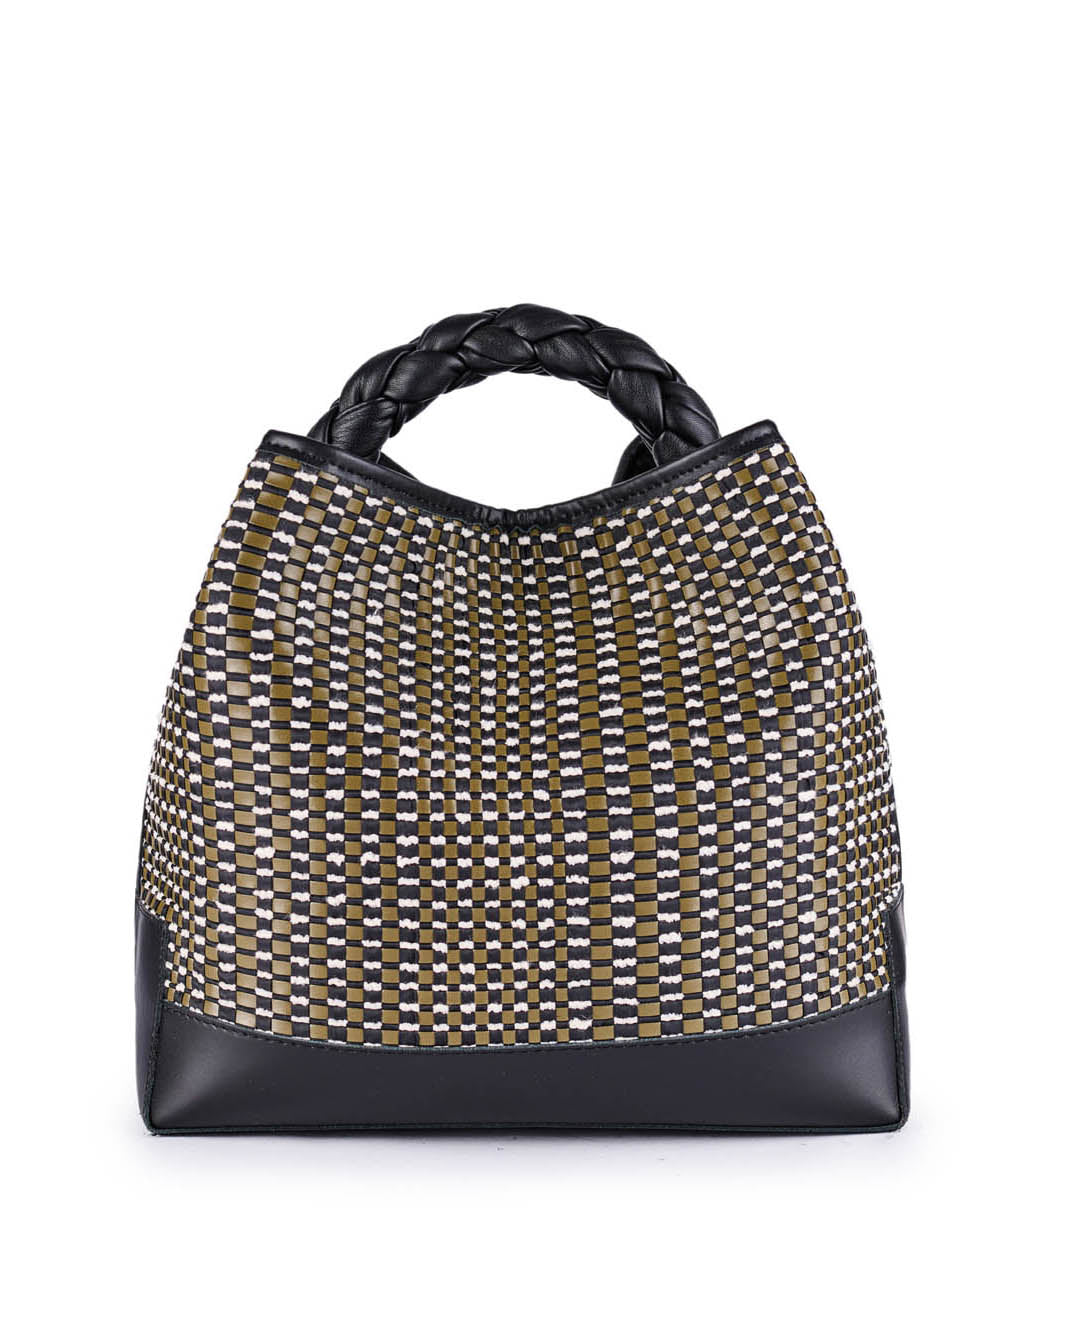 Woven leather handbag with black braided handle and checkered pattern